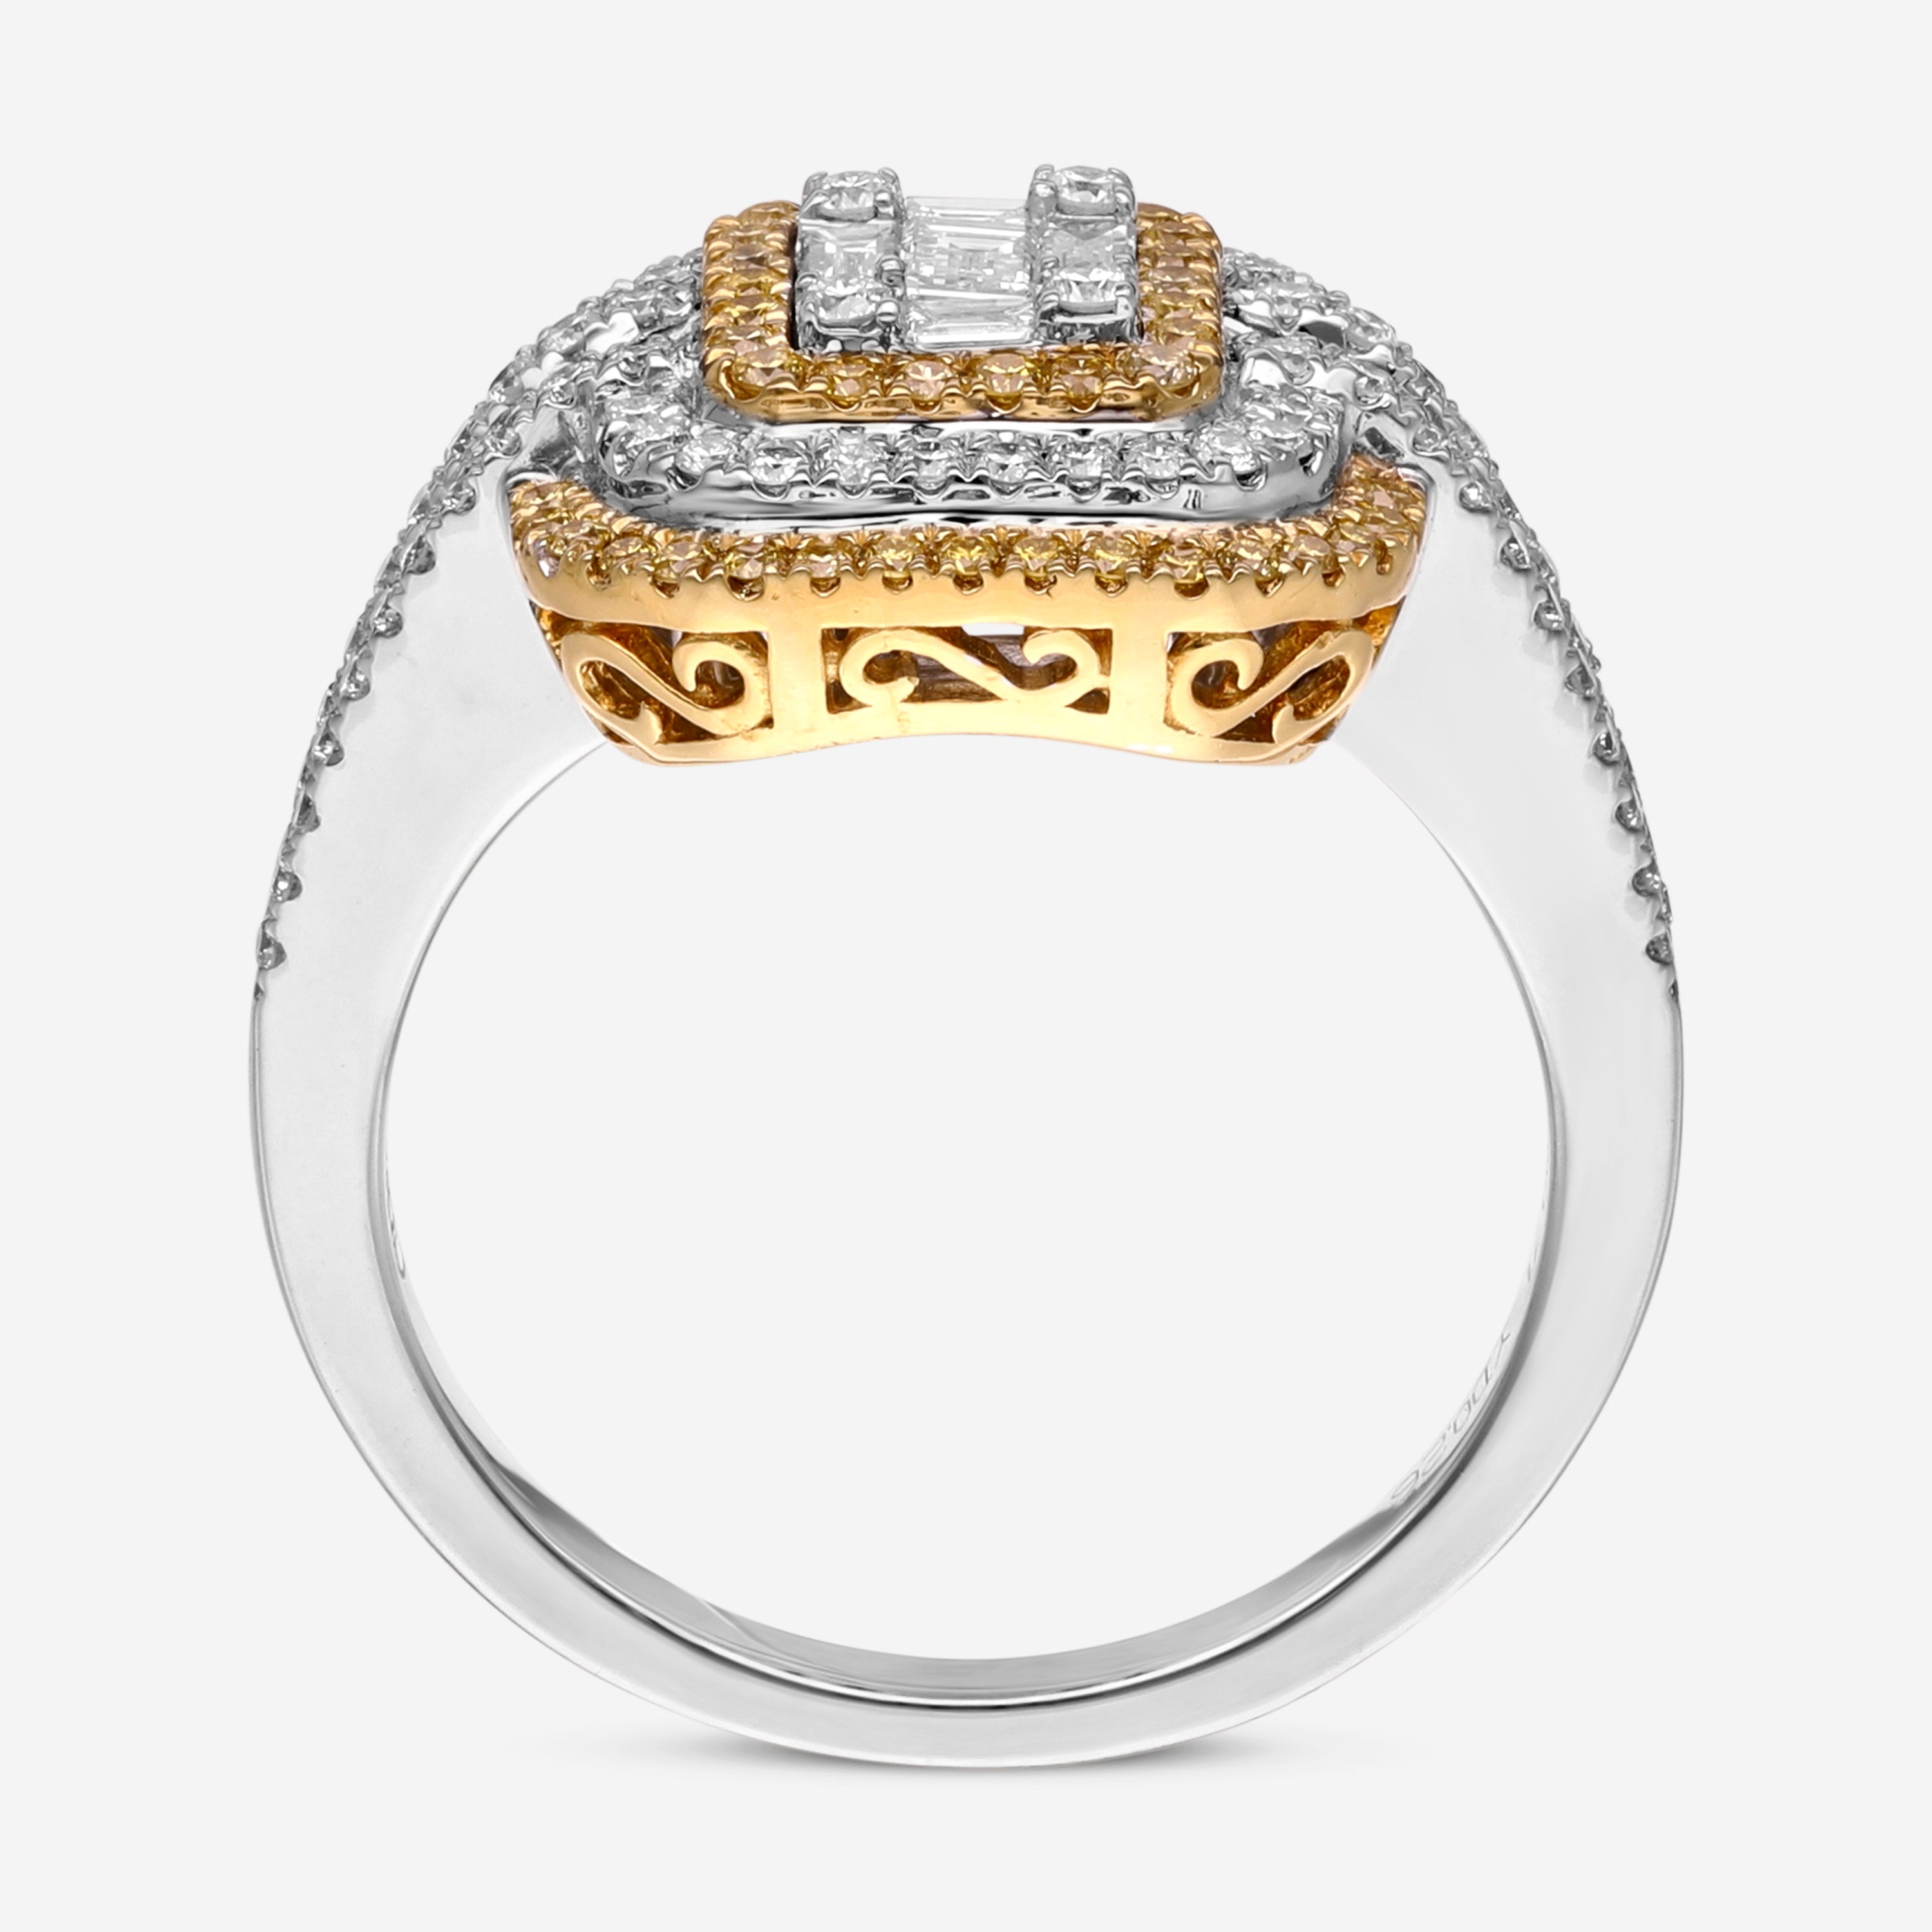 Gregg Ruth 18K White and Yellow Gold, Diamond and Fancy Yellow Diamond Engagement Ring 047201 - GCR/000934 - THE SOLIST